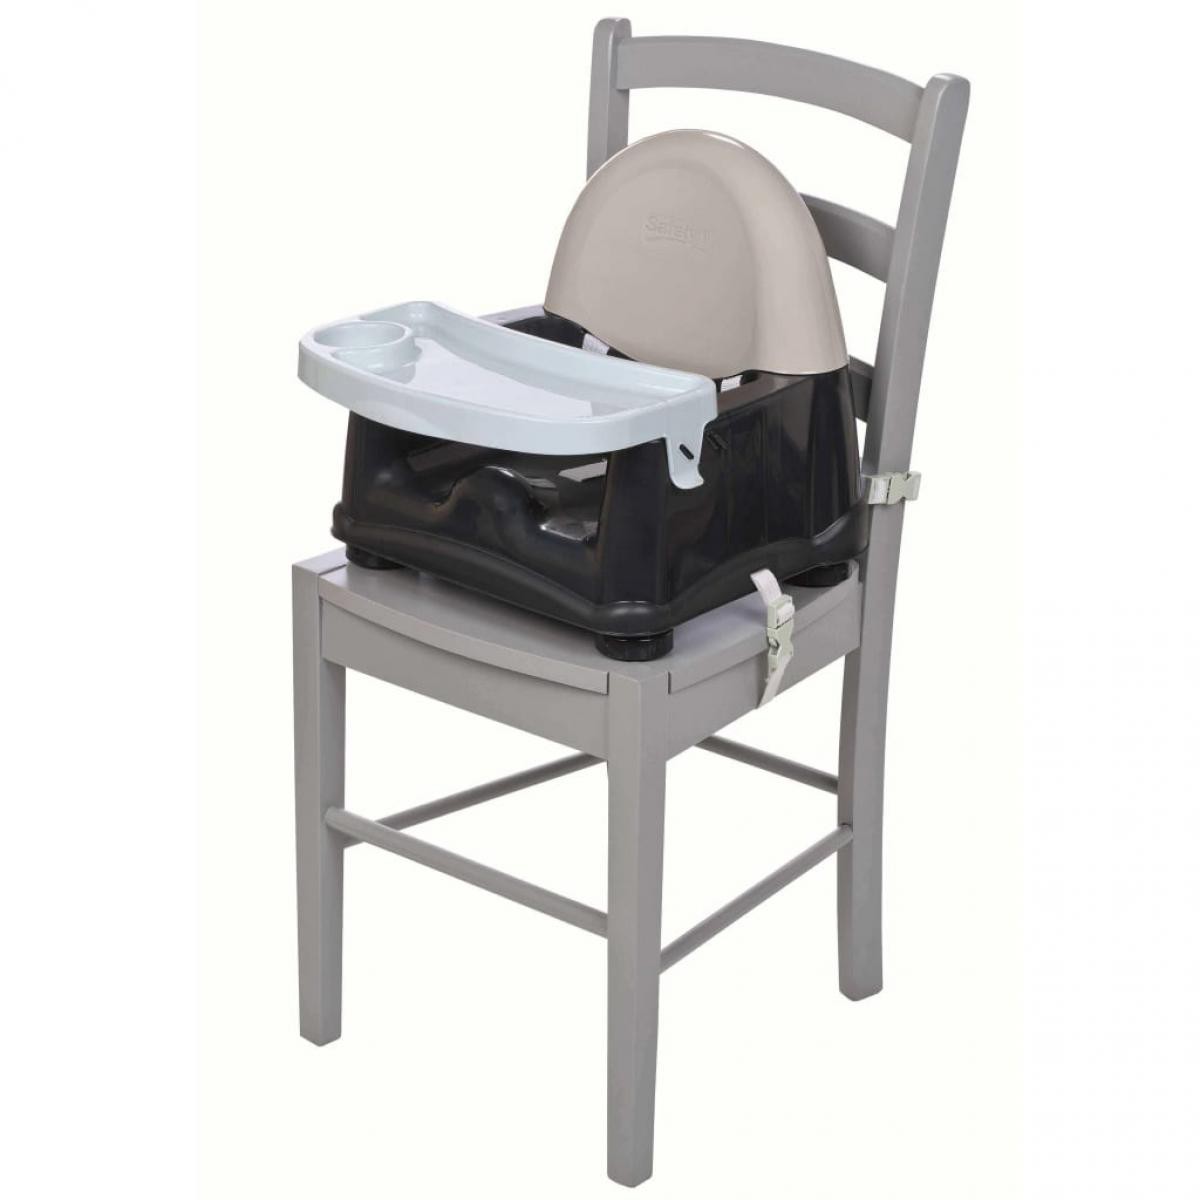 Safety 1St - Safety 1st Rehausseur Easy Care Gris chaud 26309490 - Chaises